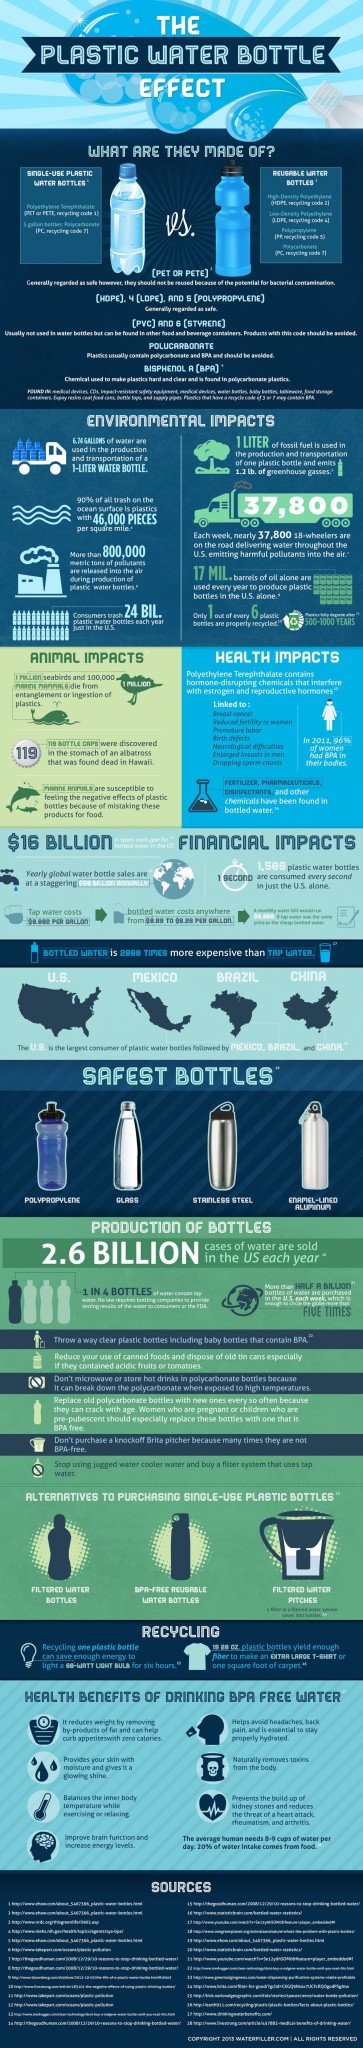 water-bottle-filling-station-infographic